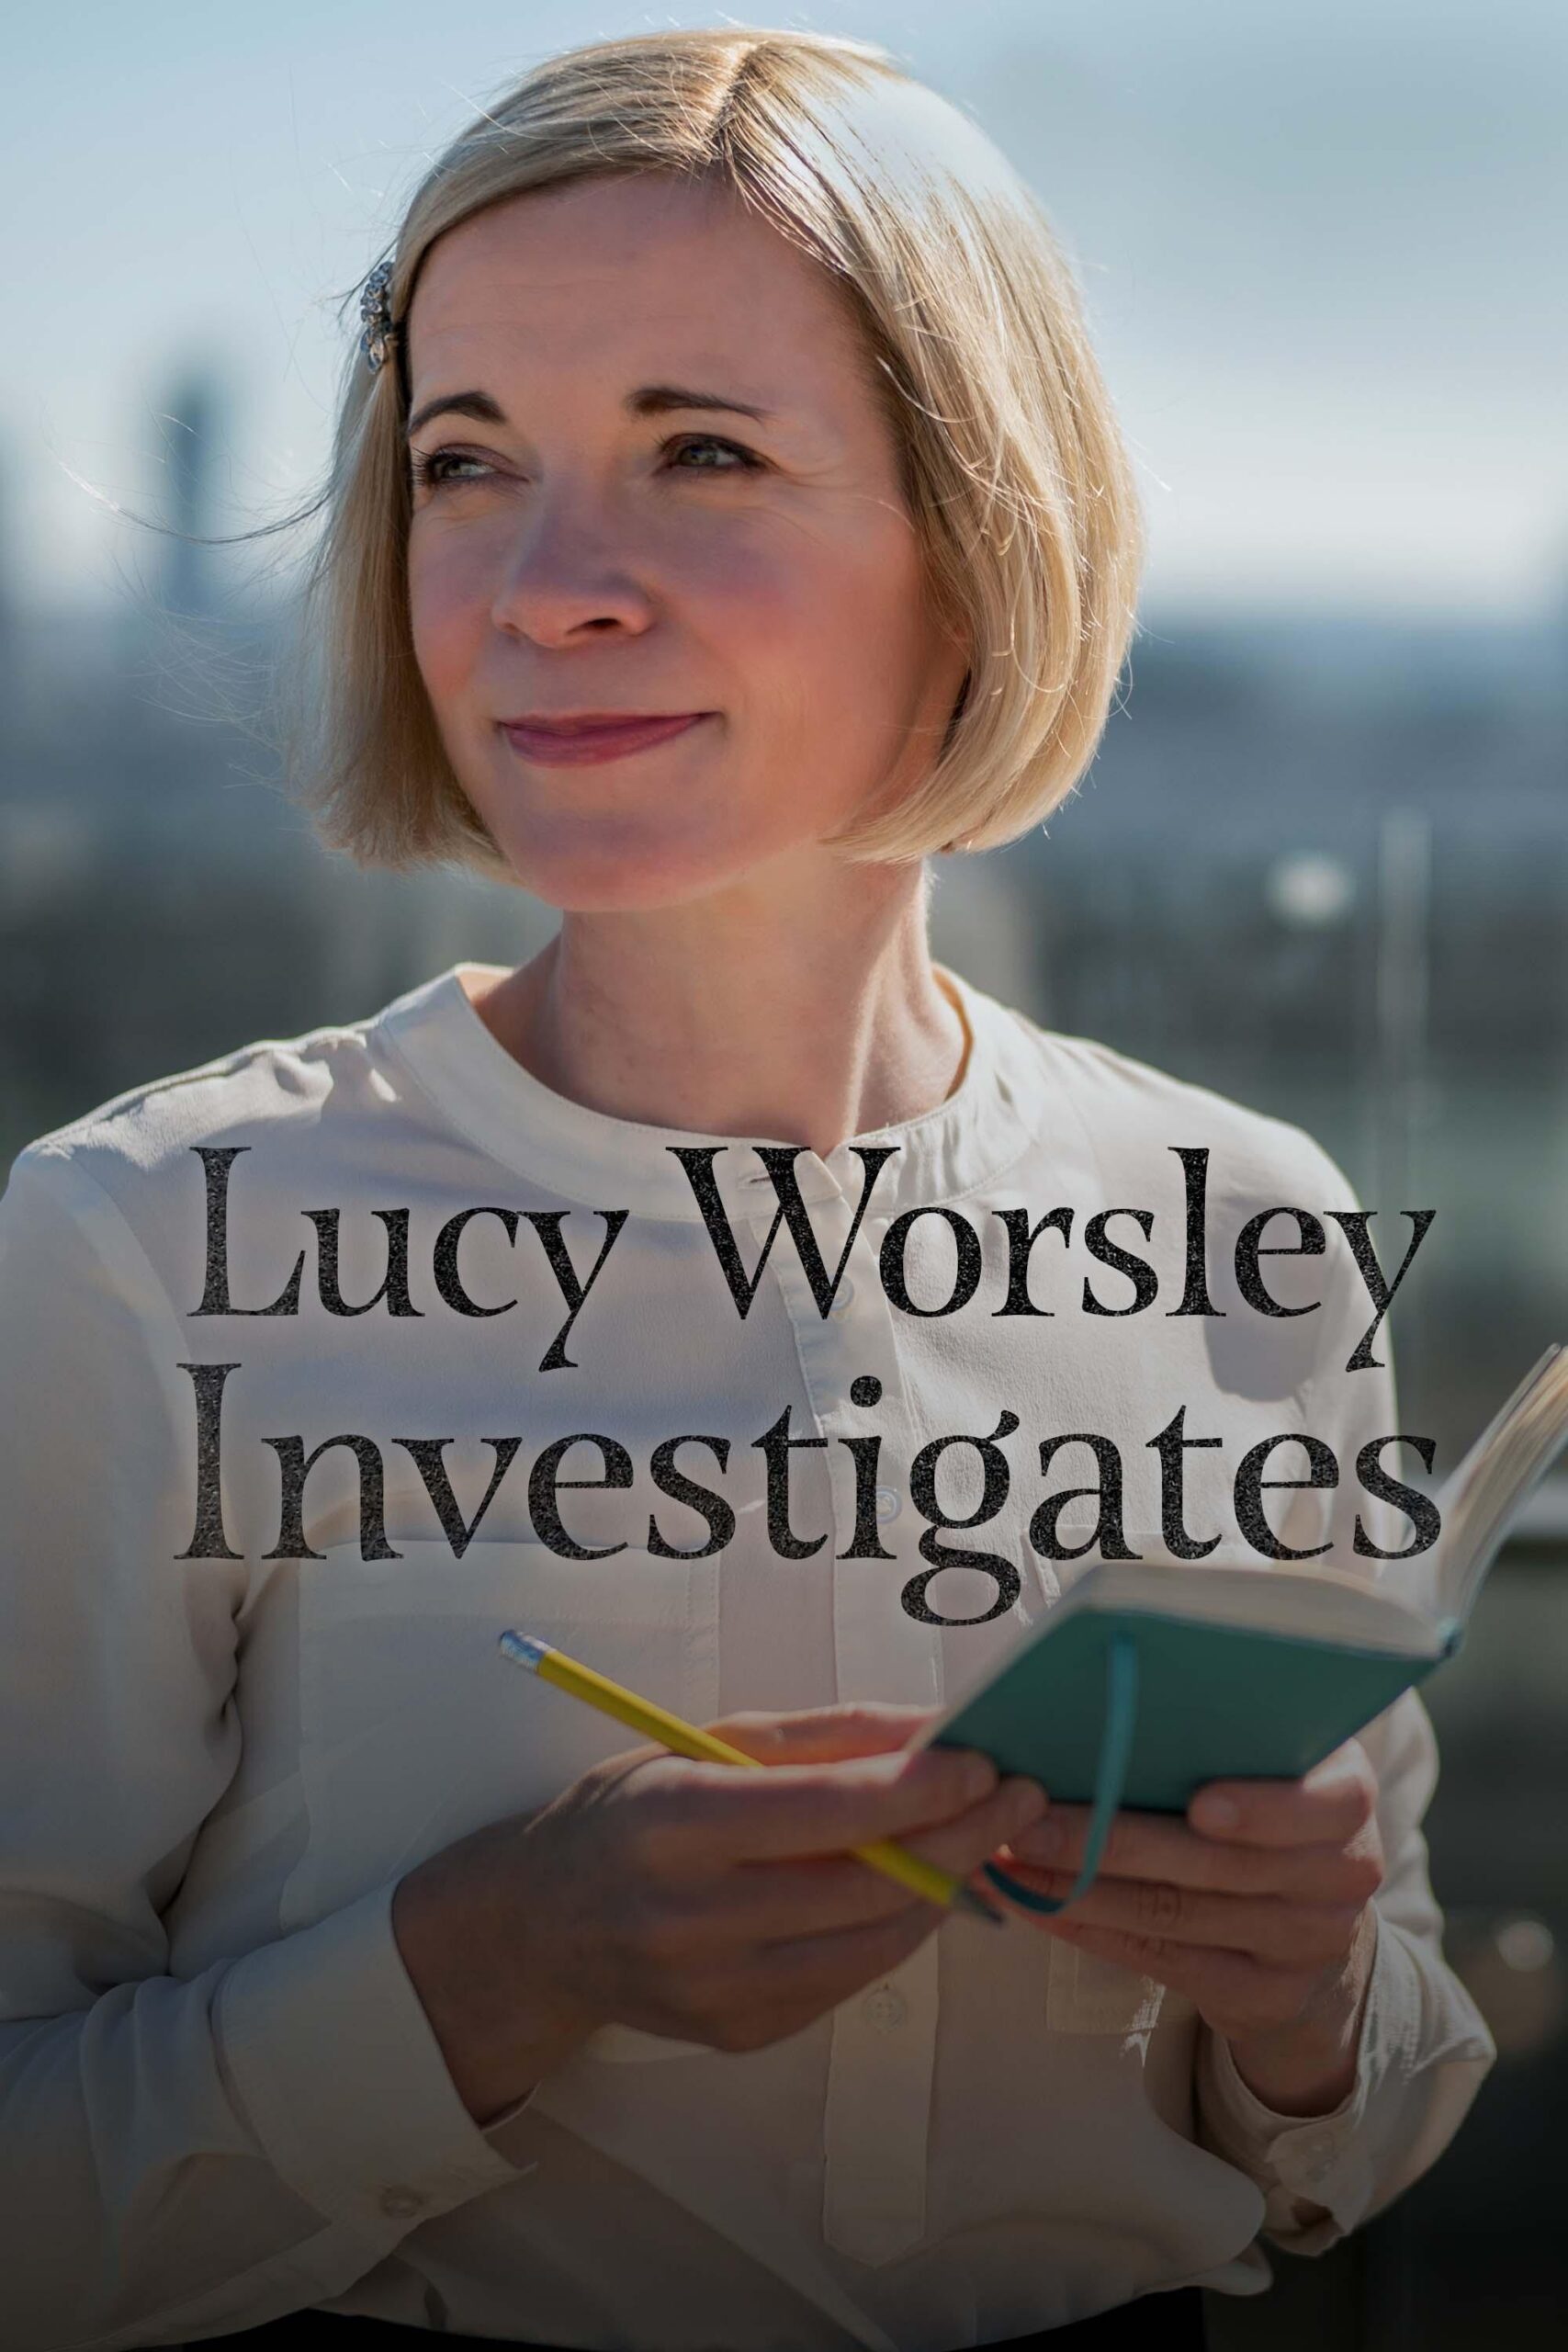 Where to Watch Lucy Worsley Investigates